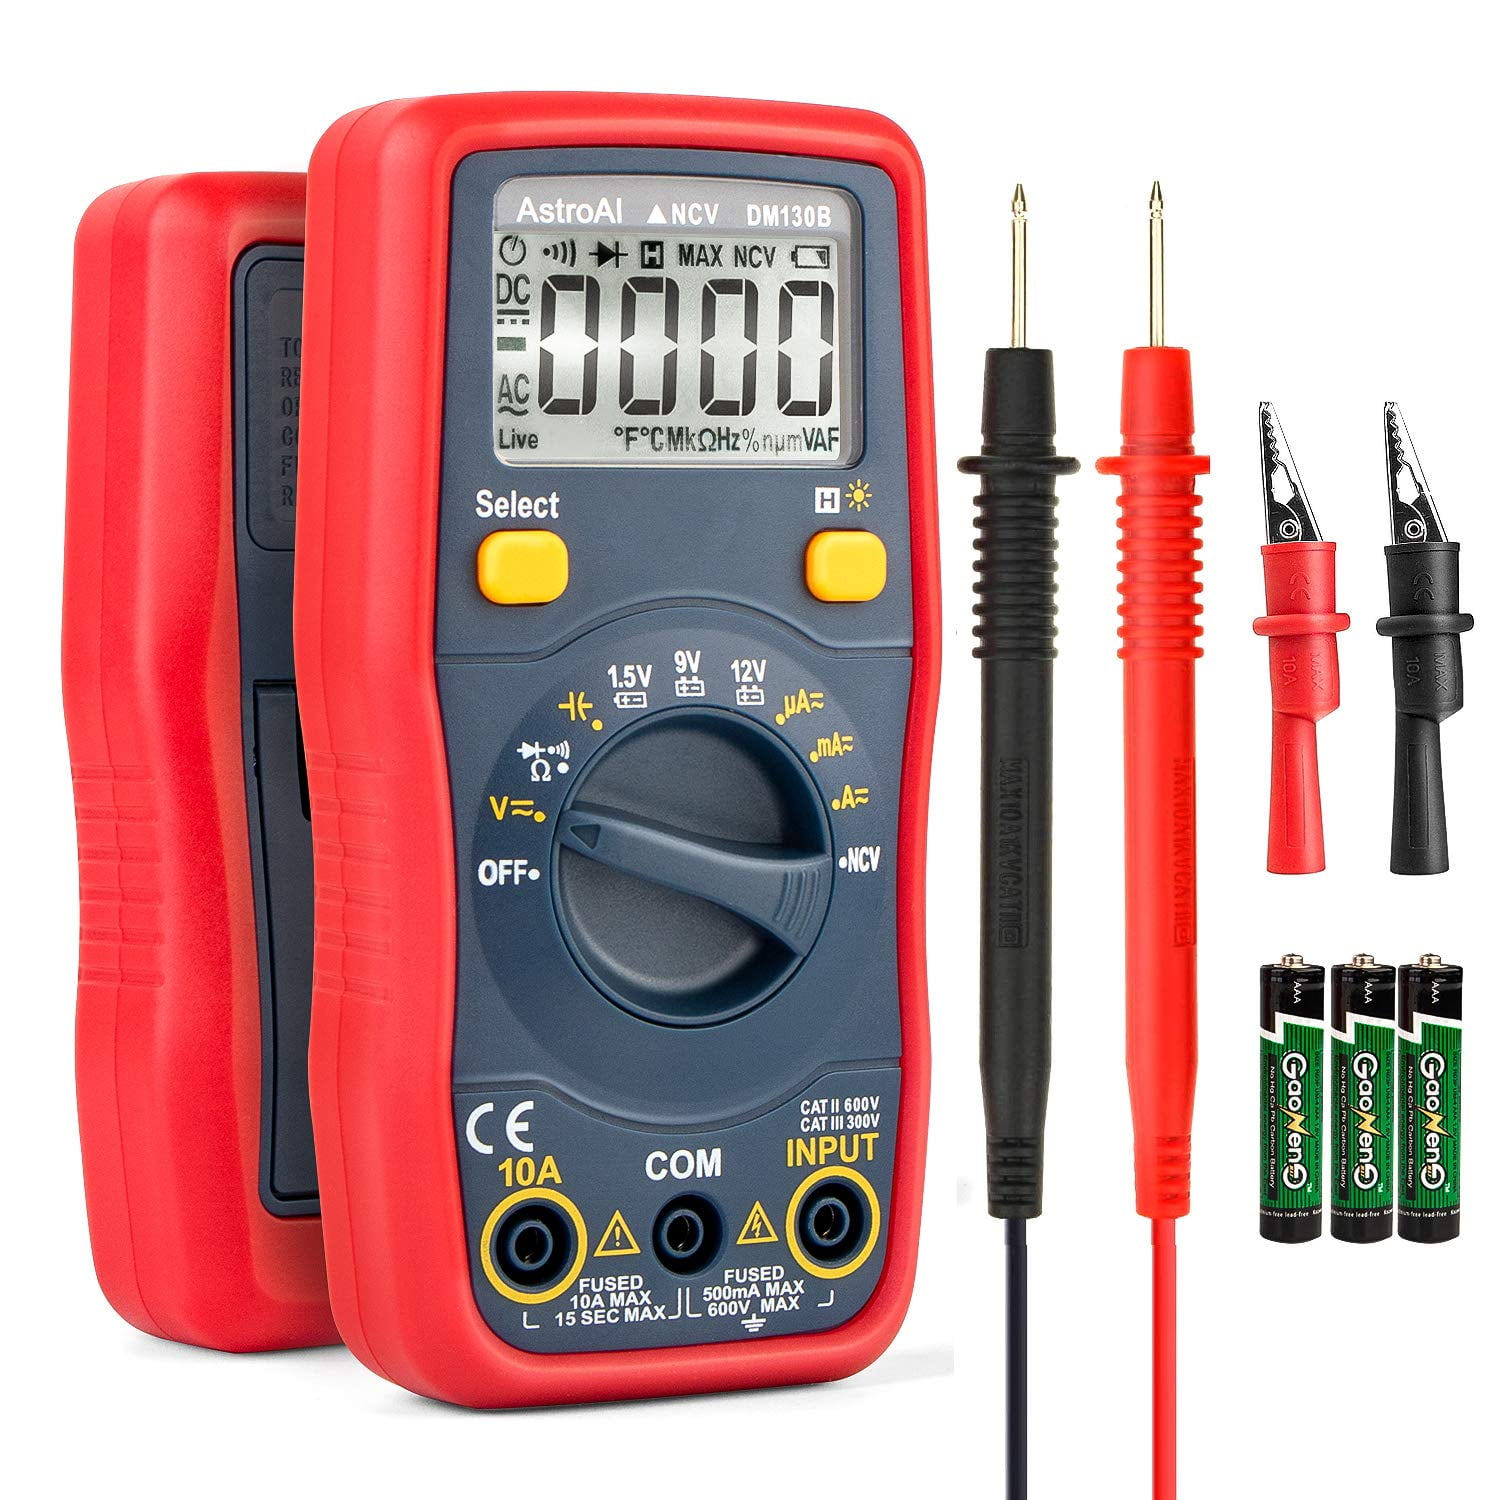 Digital Multimeter TRMS 4000 Counts Volt Meter Manual and Auto Ranging